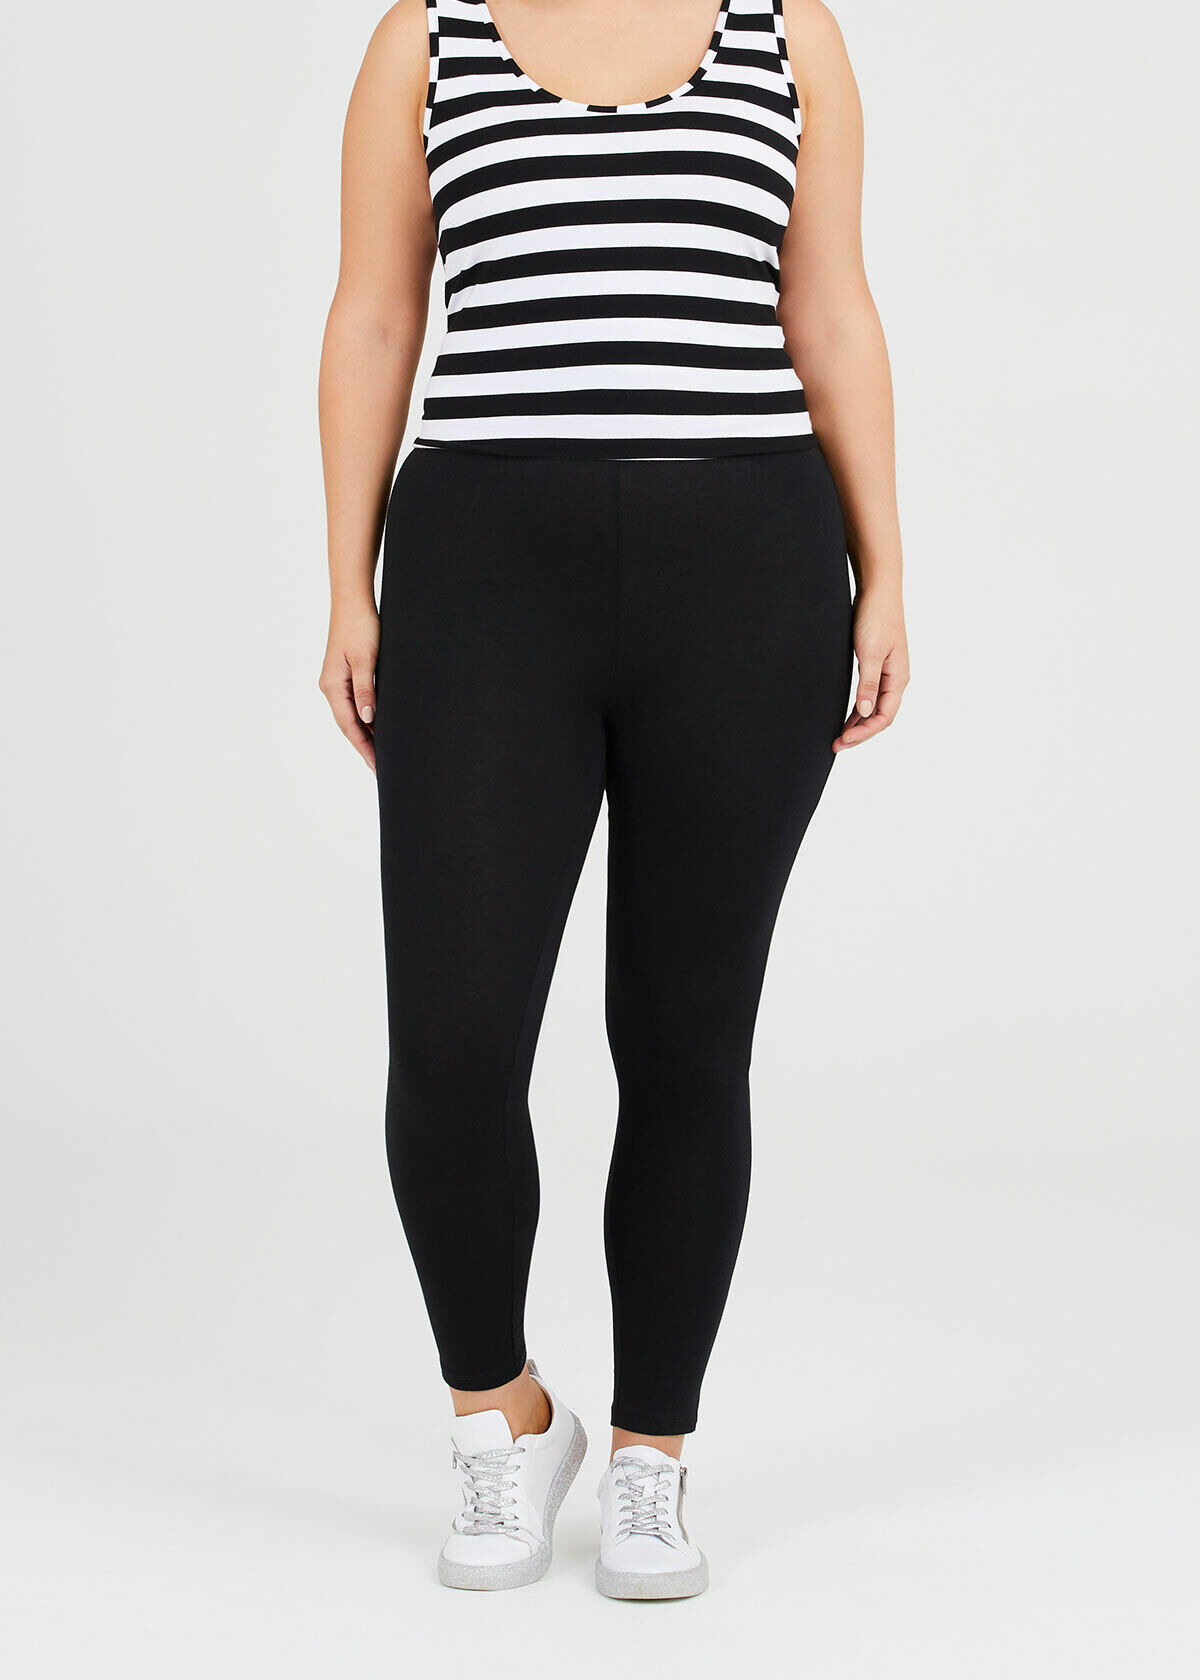 Buy Just My Size Women's Plus-Size Stretch Jersey Legging, Black, 3X at  Amazon.in